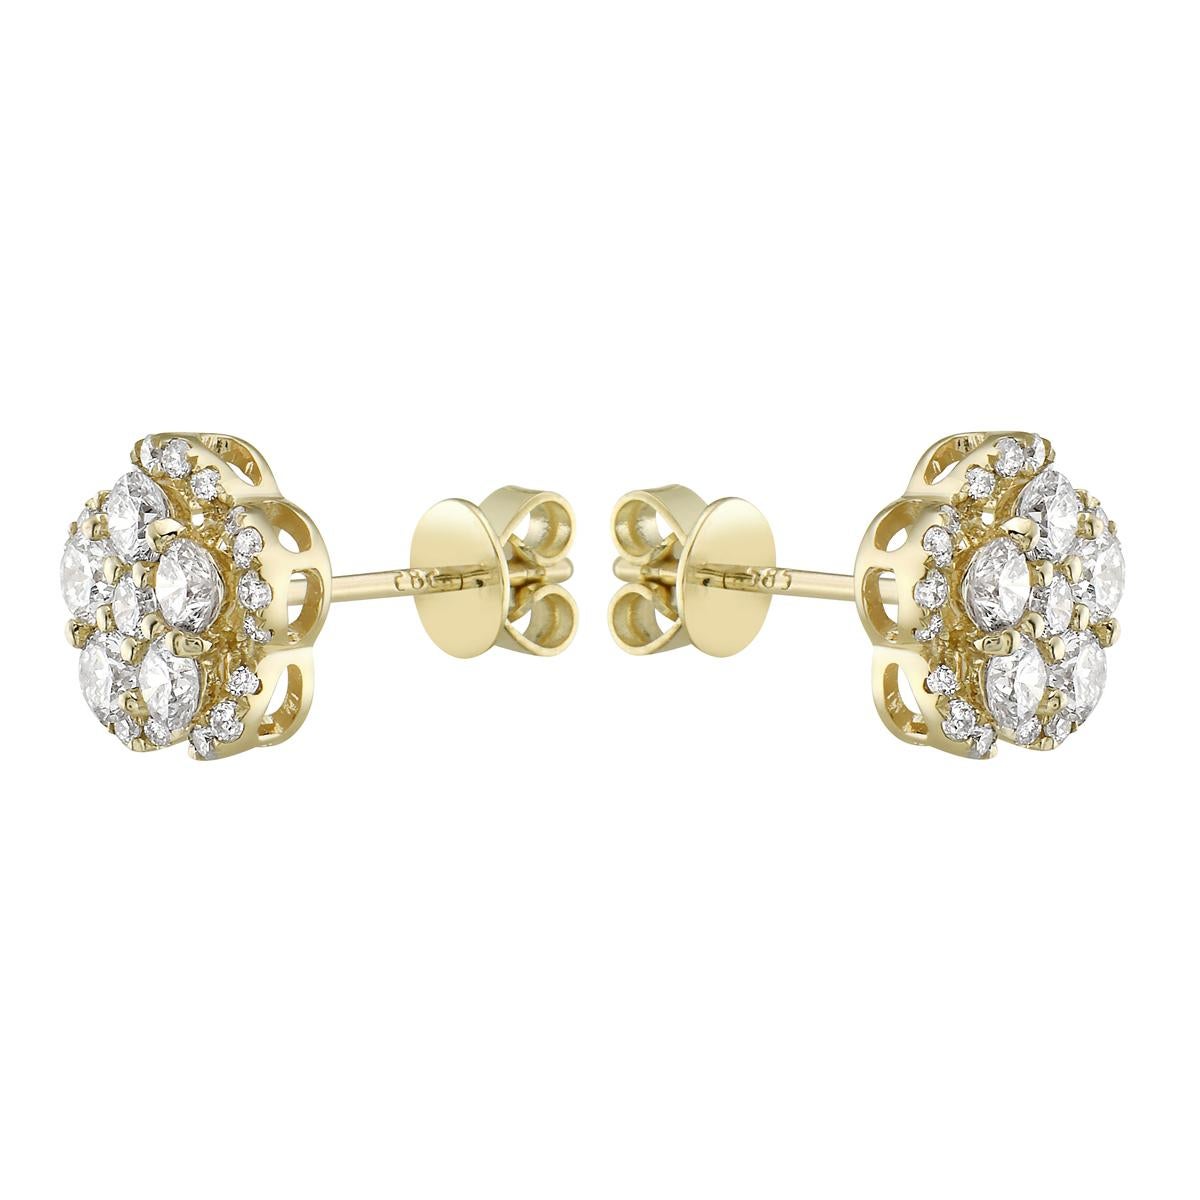 With these exquisite yellow-gold diamond studs, style and glamour are in the spotlight. These studs are set in 14-carat gold, made out of 2.0 grams of gold. The color of the diamonds is GH. The clarity is SI1-OSI2. These earrings are made out of 52